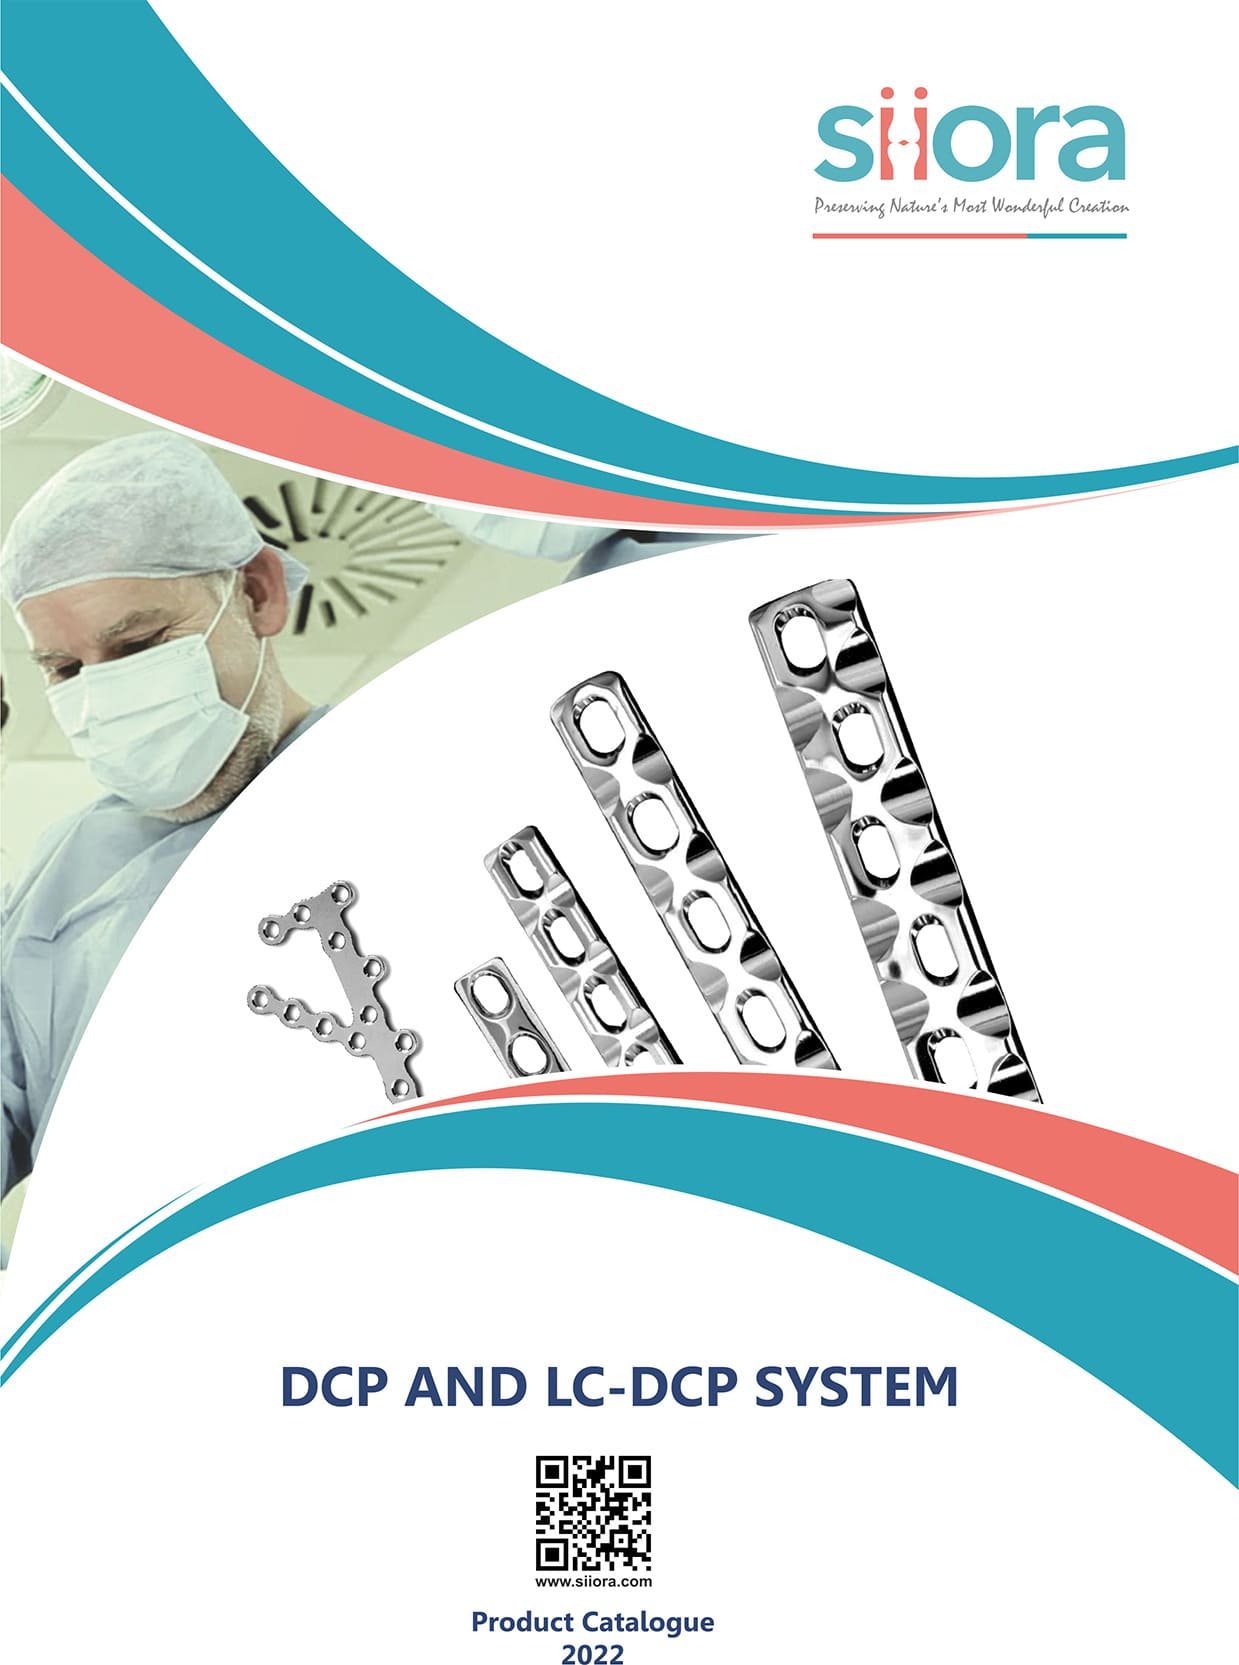 DCP and LC-DCP System